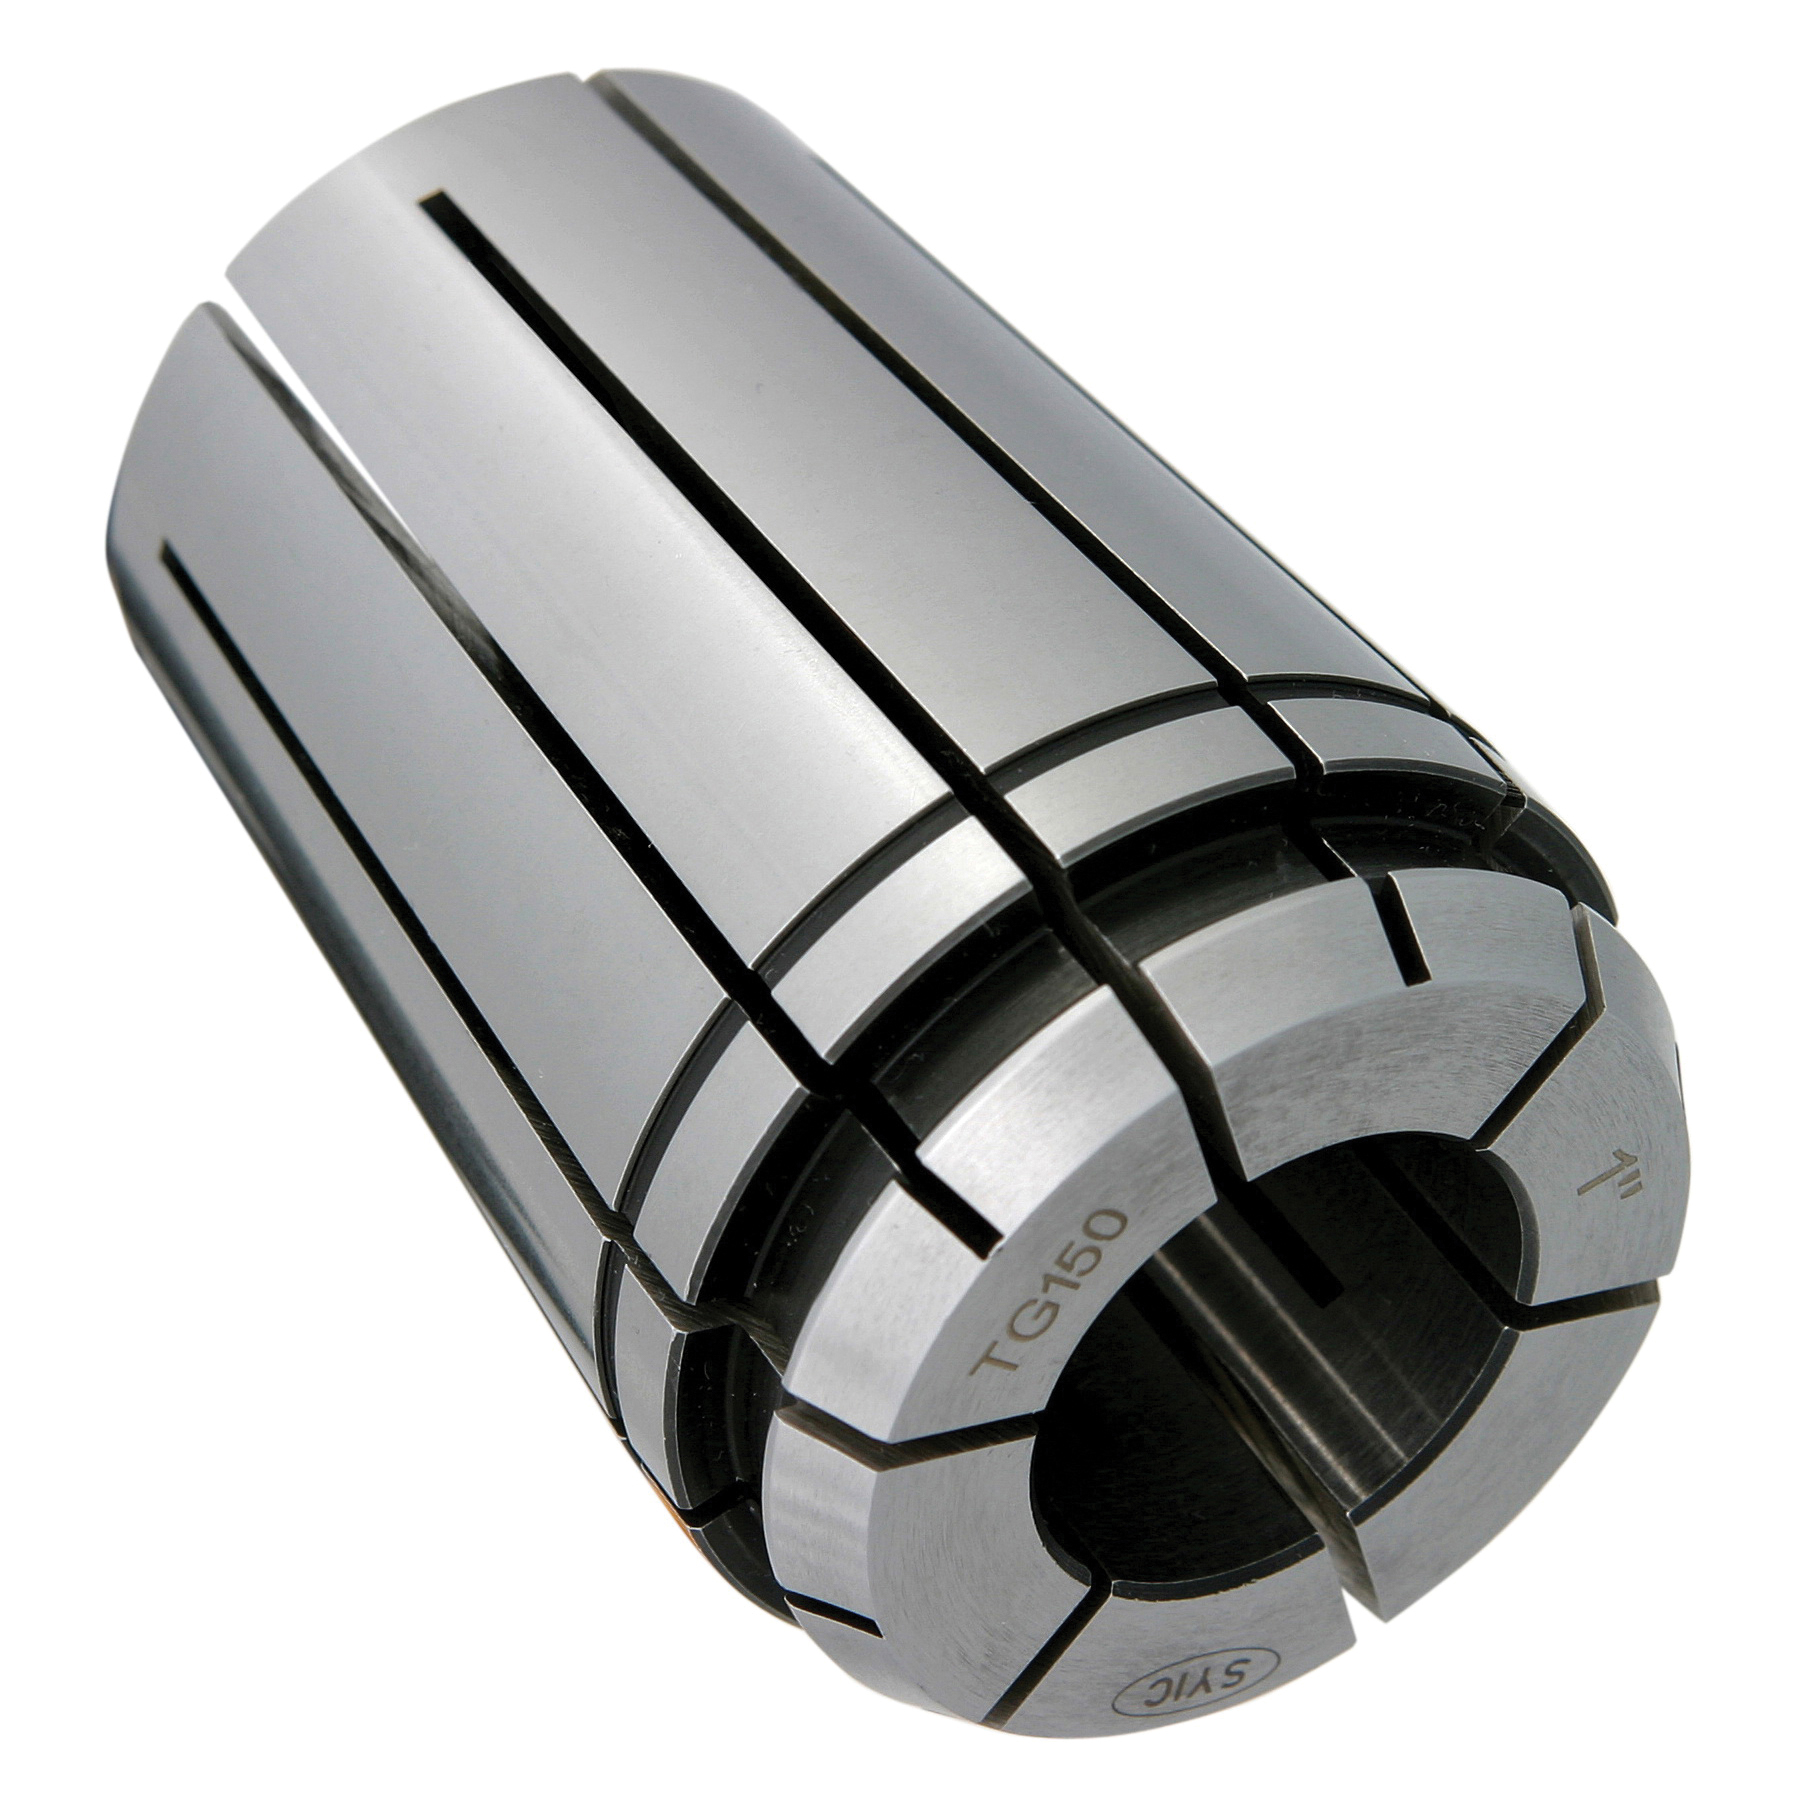 TG150 3/8" COLLET